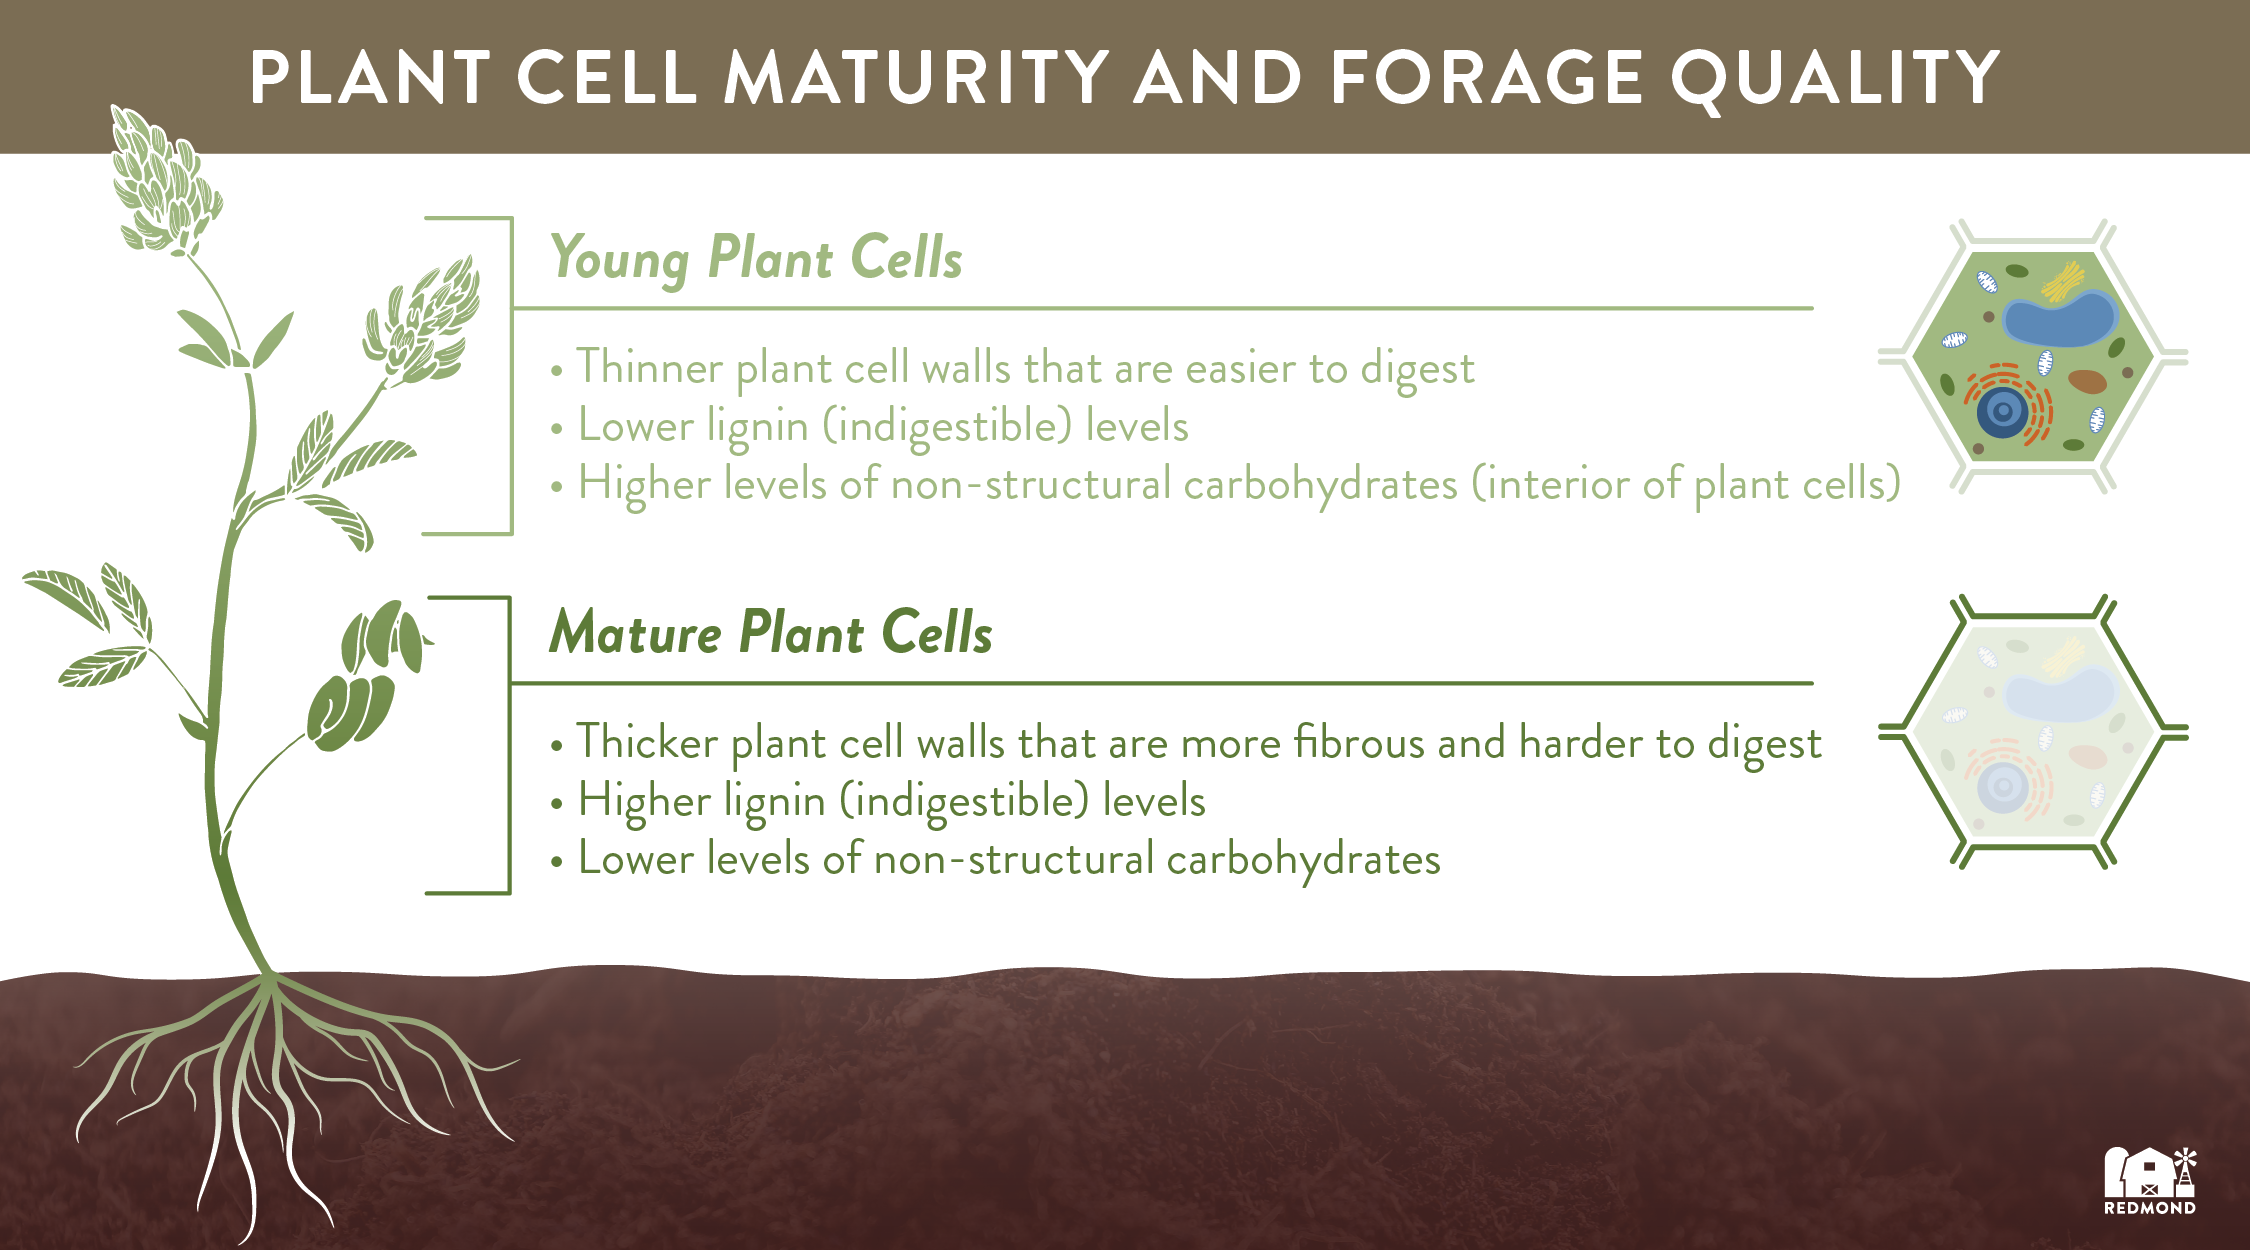 Plant cell maturity and forage quality